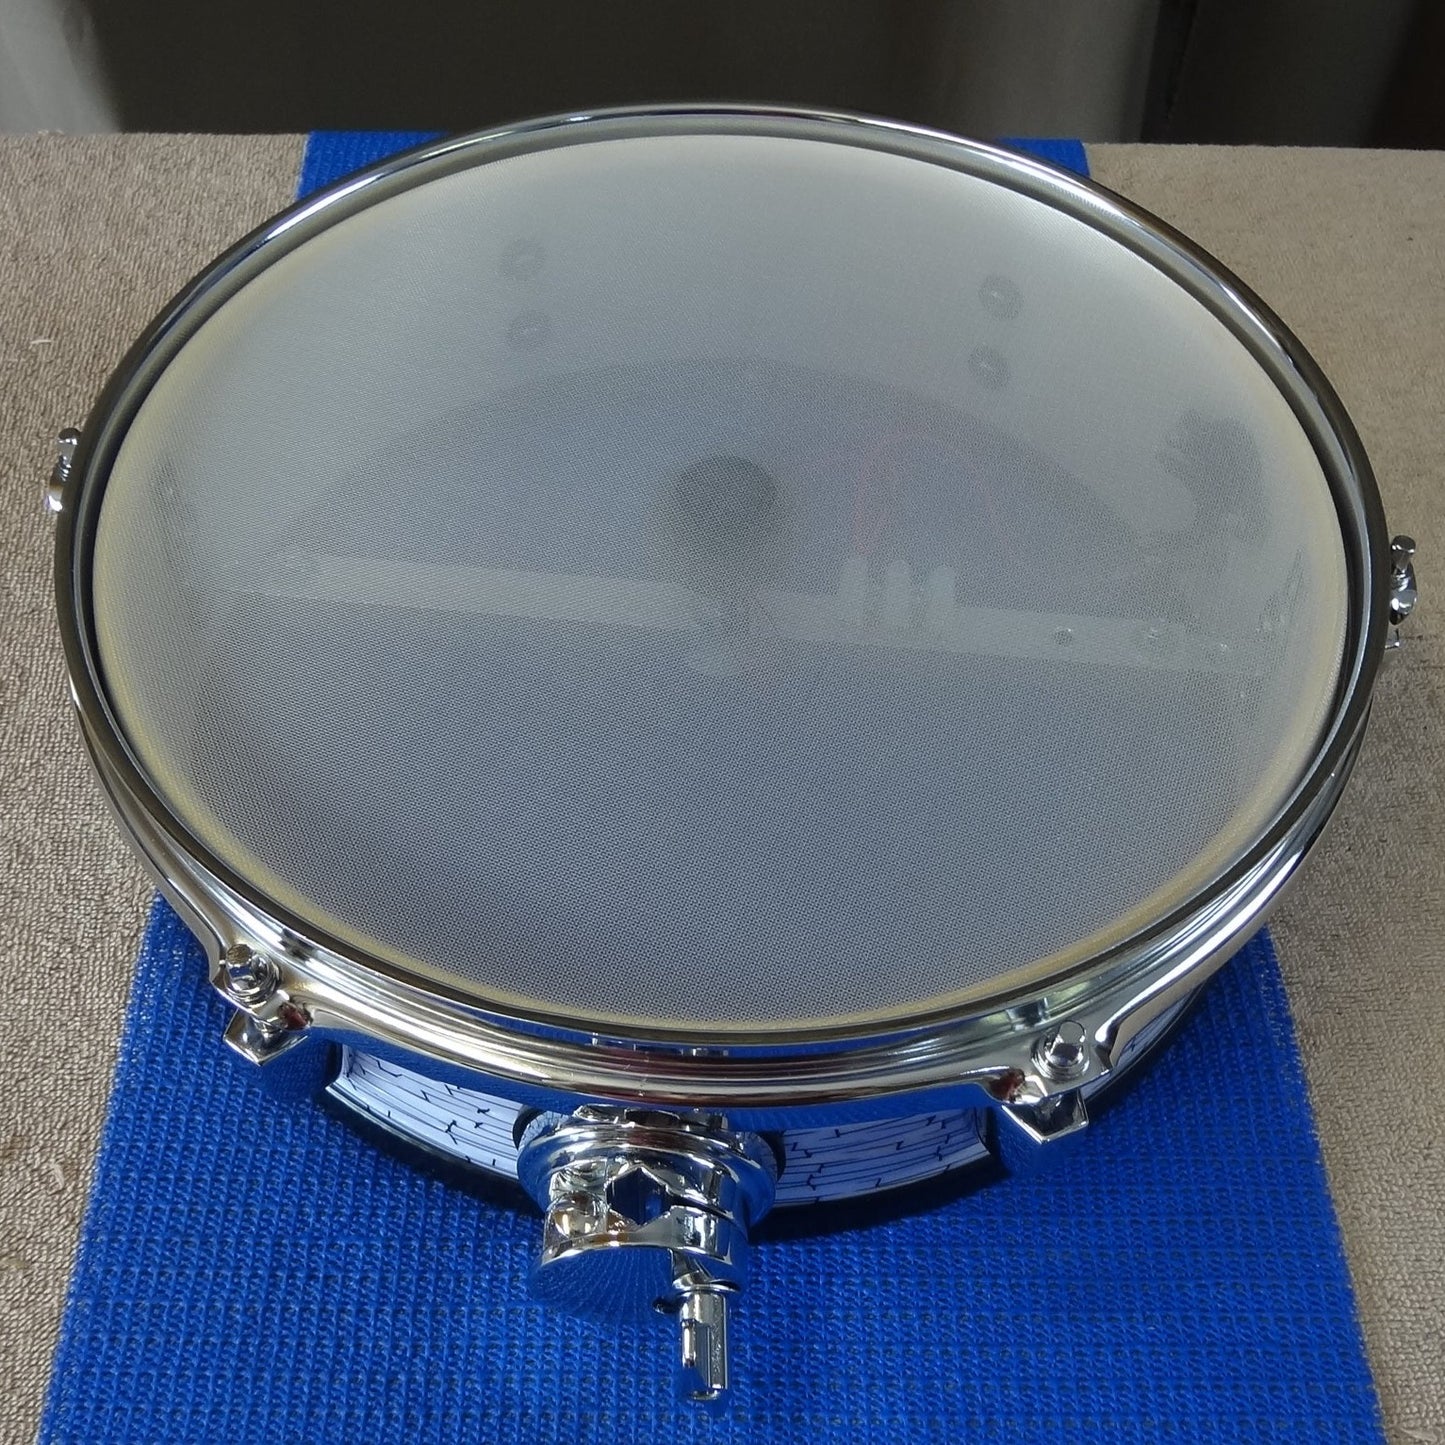 New 12 Inch Custom Electronic Snare Drum - White/Black Etch